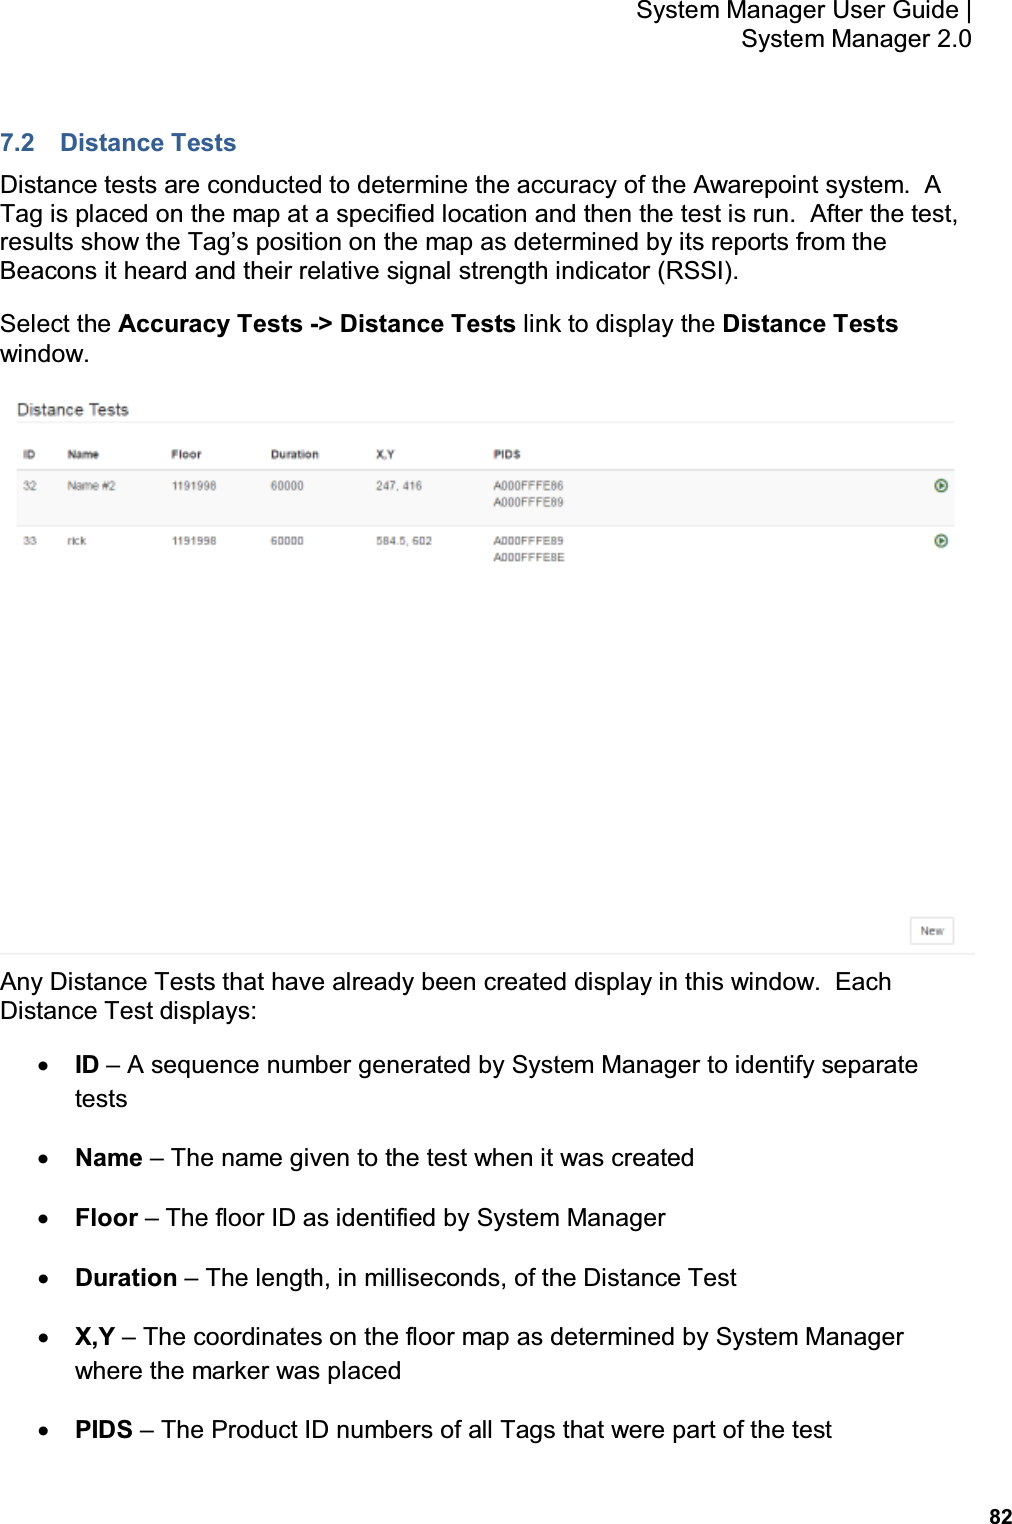           82 System Manager User Guide |  System Manager 2.0 7.2  Distance Tests Distance tests are conducted to determine the accuracy of the Awarepoint system.  A Tag is placed on the map at a specified location and then the test is run.  After the test, results show the Tag’s position on the map as determined by its reports from the Beacons it heard and their relative signal strength indicator (RSSI). Select the Accuracy Tests -&gt; Distance Tests link to display the Distance Tests window.  Any Distance Tests that have already been created display in this window.  Each Distance Test displays: • ID – A sequence number generated by System Manager to identify separate tests • Name – The name given to the test when it was created • Floor – The floor ID as identified by System Manager • Duration – The length, in milliseconds, of the Distance Test • X,Y – The coordinates on the floor map as determined by System Manager where the marker was placed • PIDS – The Product ID numbers of all Tags that were part of the test 